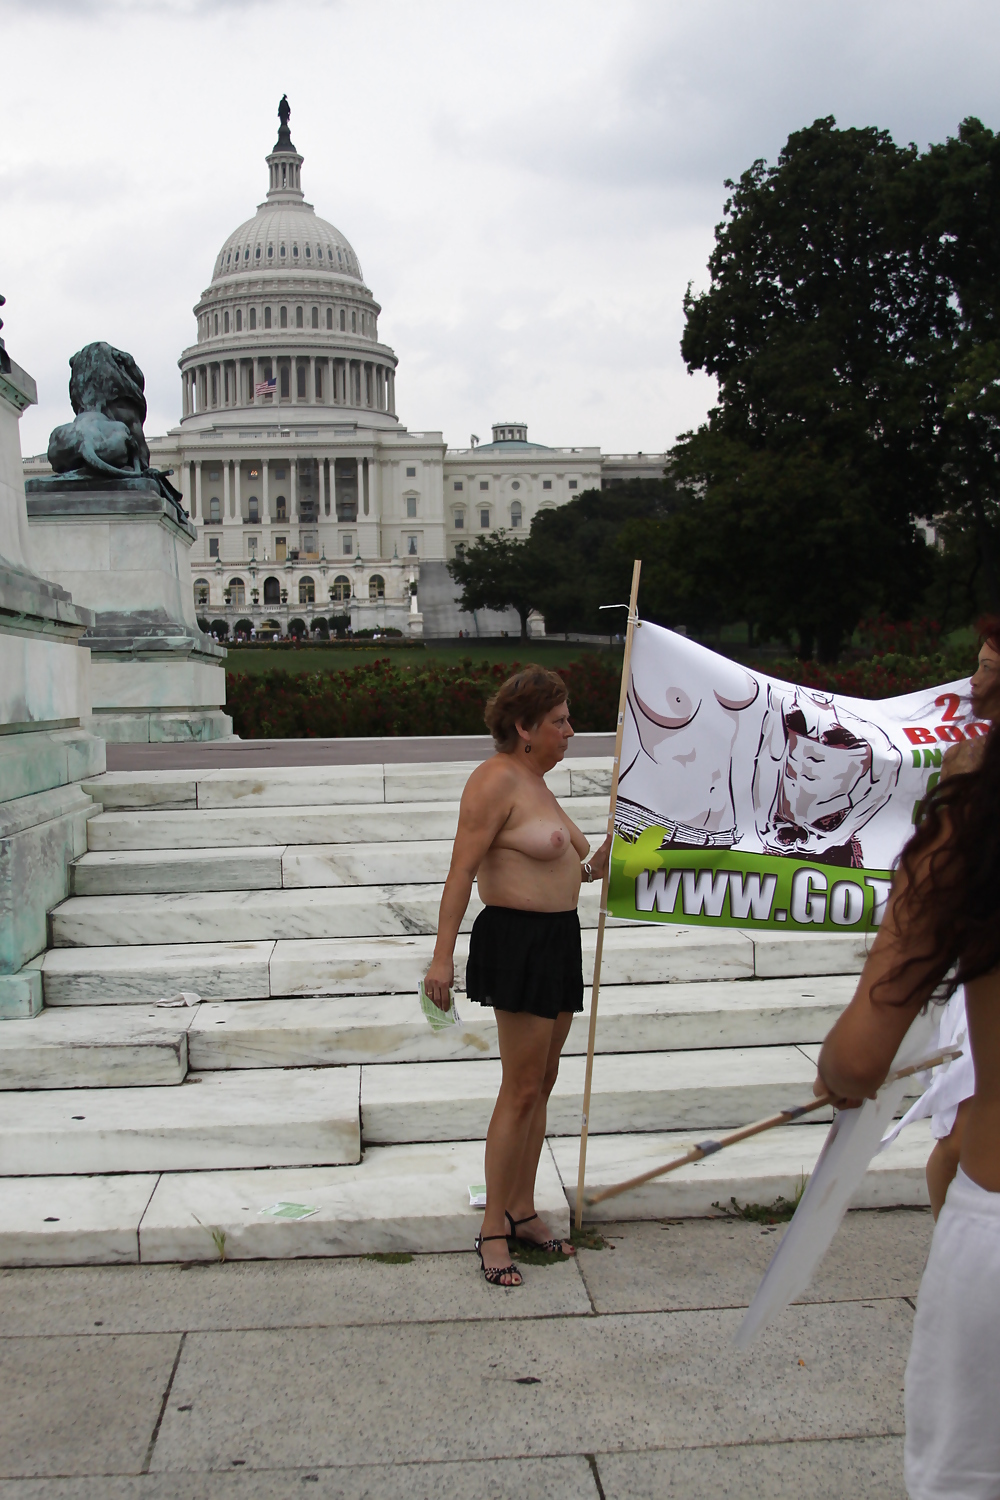 National Gehen Topless Tag In Dc - 21. August 2011 #5887810